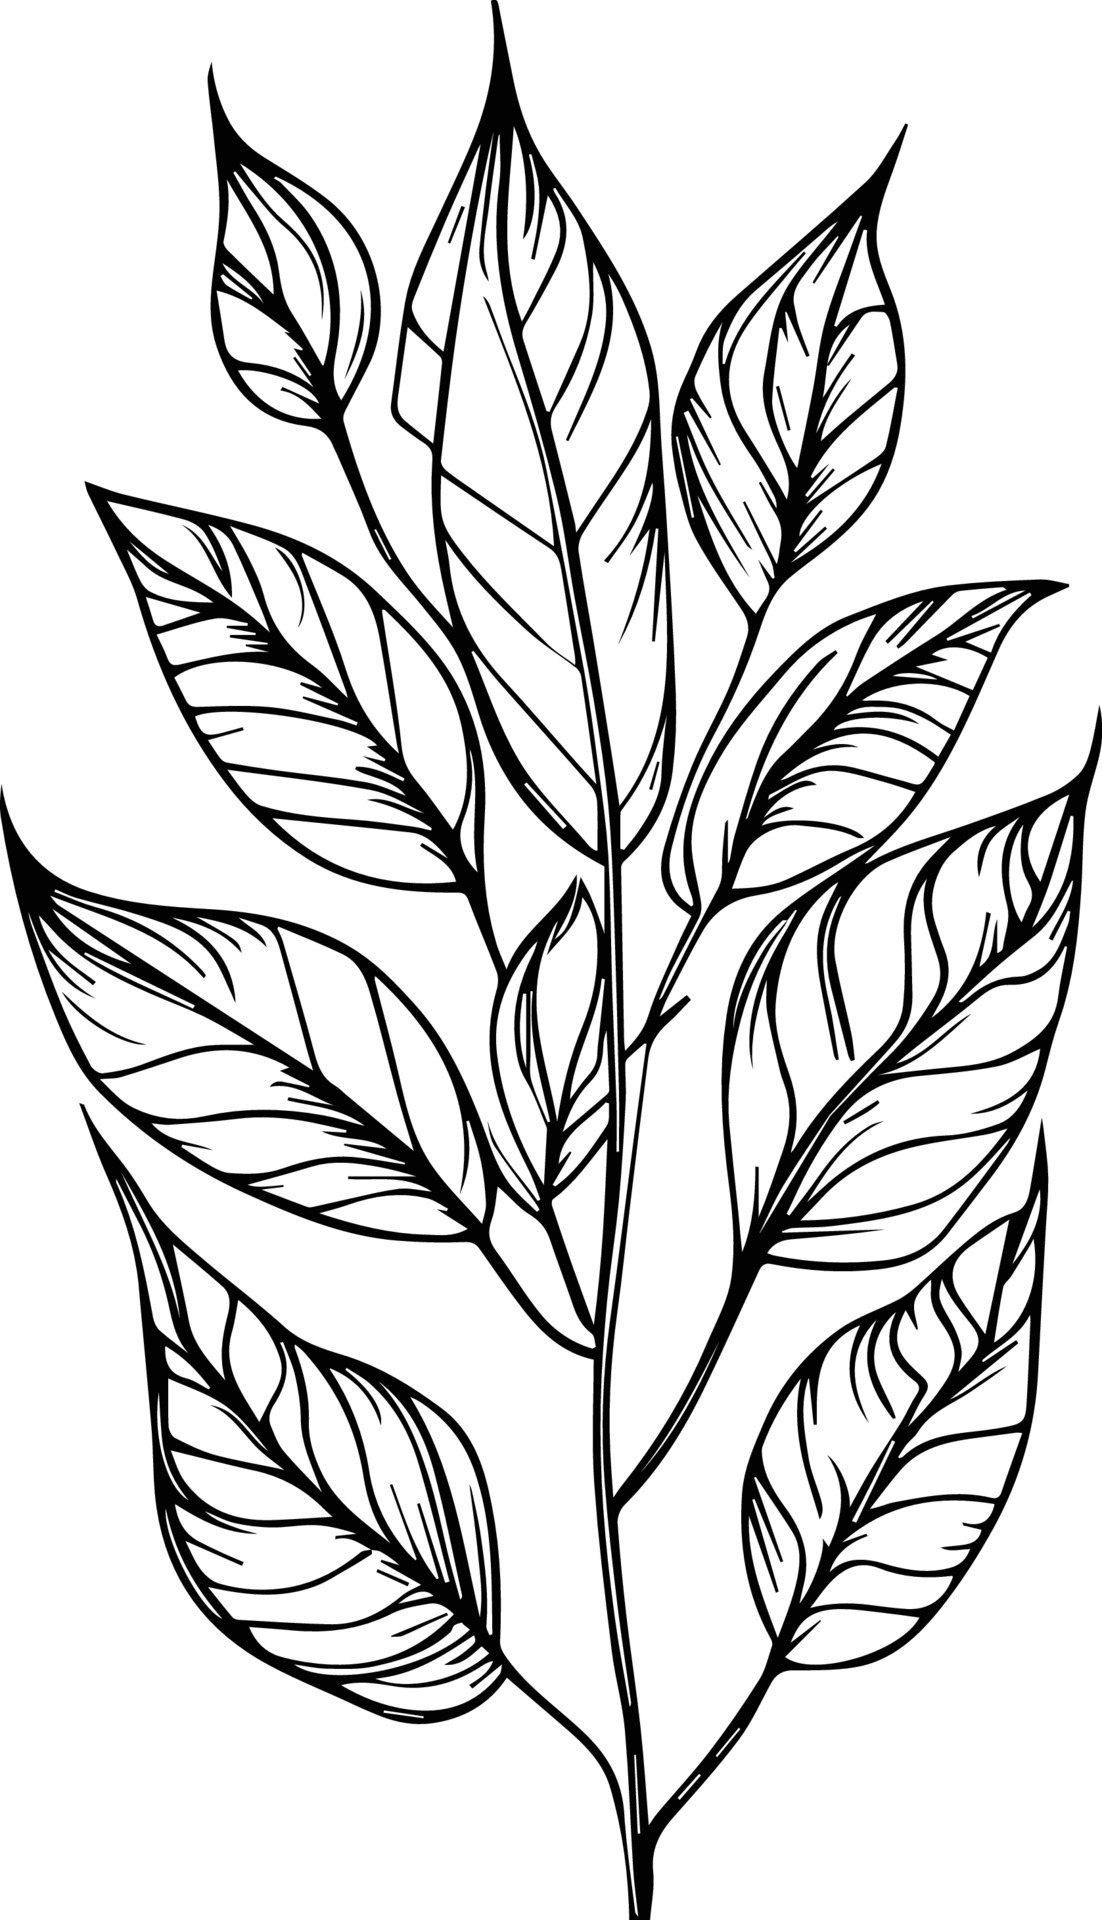 leaf. learning on how to draw realistic. any noticeable mistakes or things  that should be changed? : r/drawing